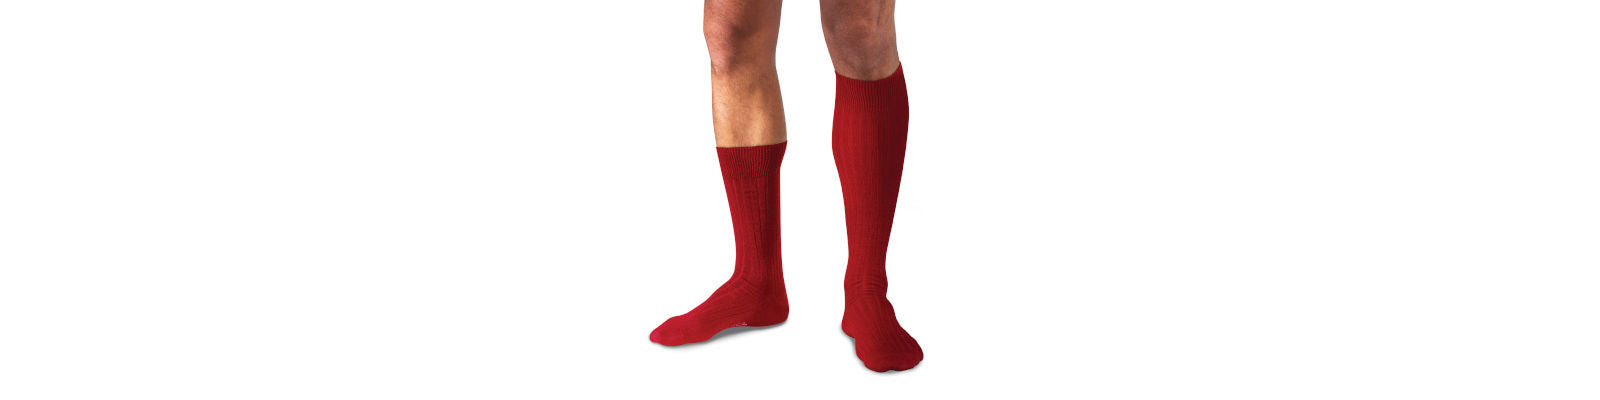 Do Your Socks Stay Up? Over-the-Calf/Knee-High vs Mid-Calf/Trouser –